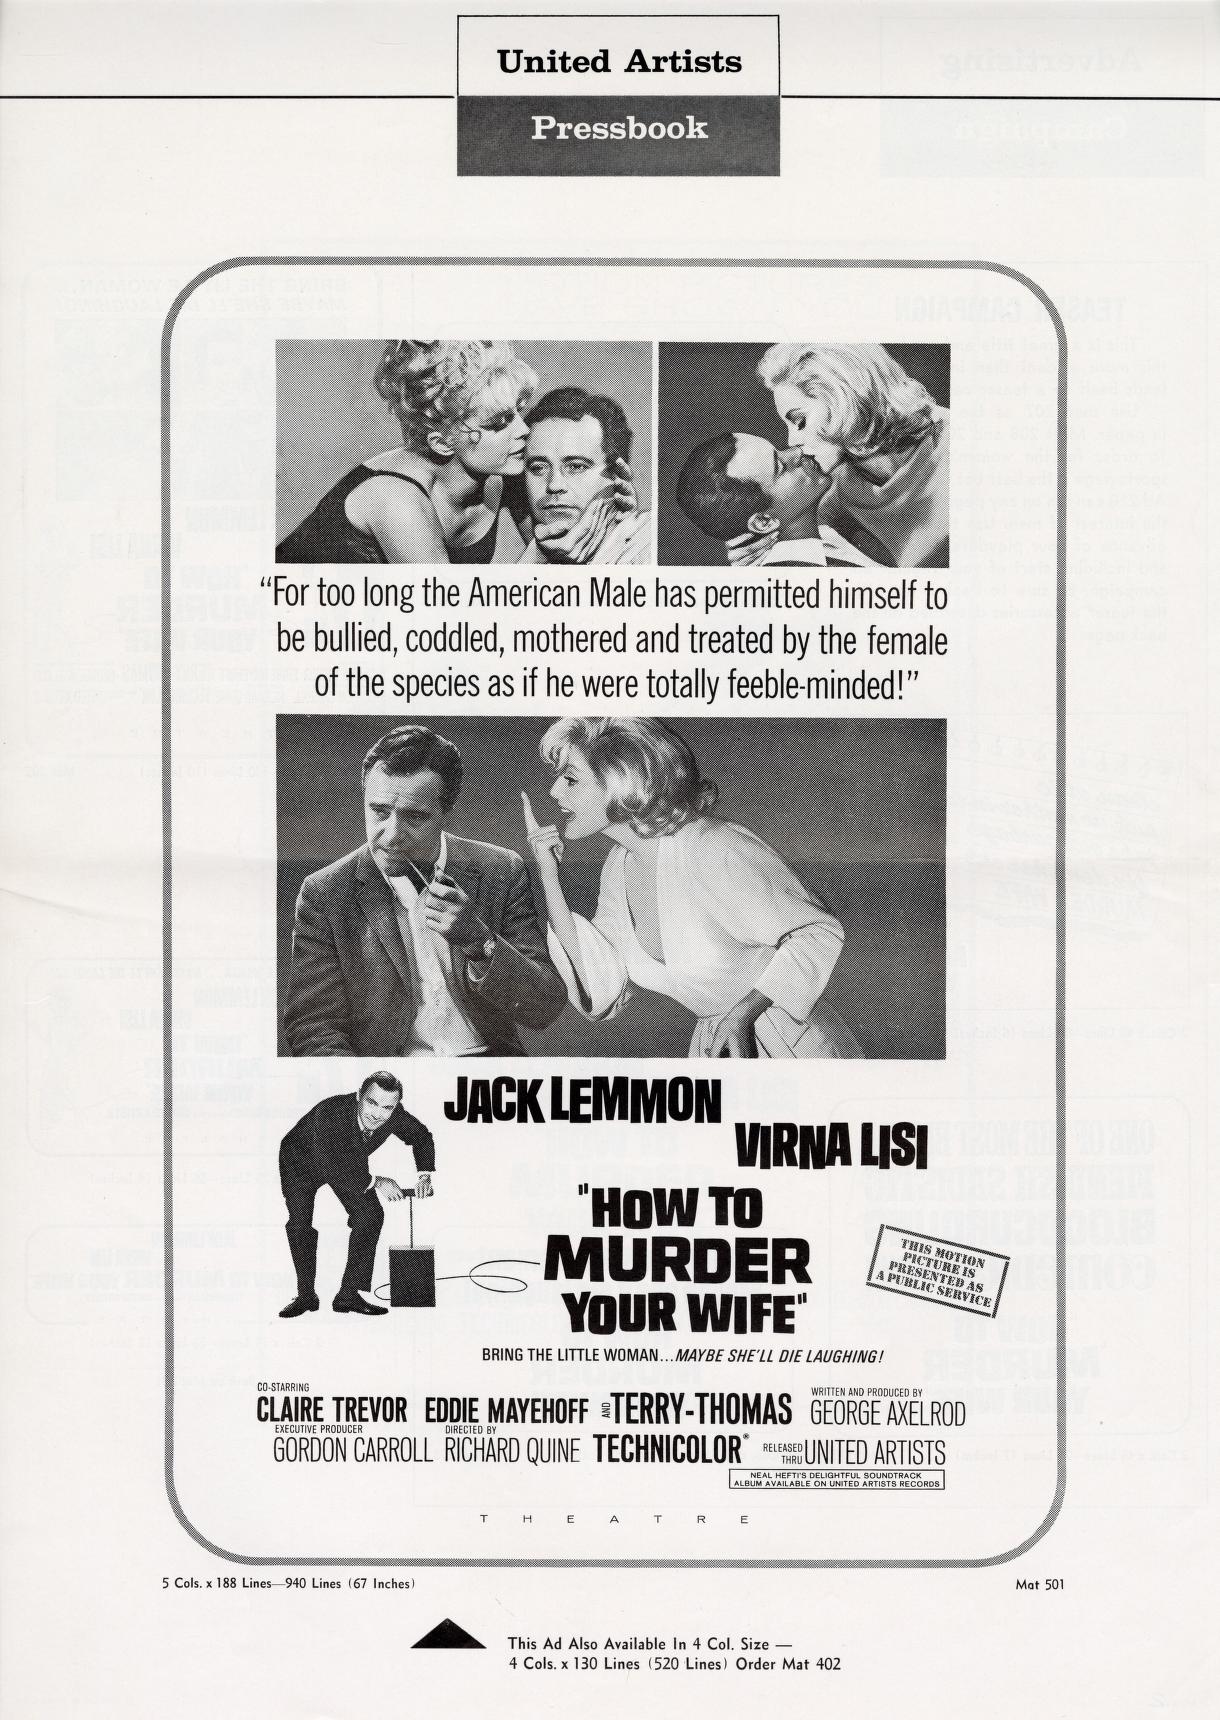 How to Murder Your Wife (United Artists)